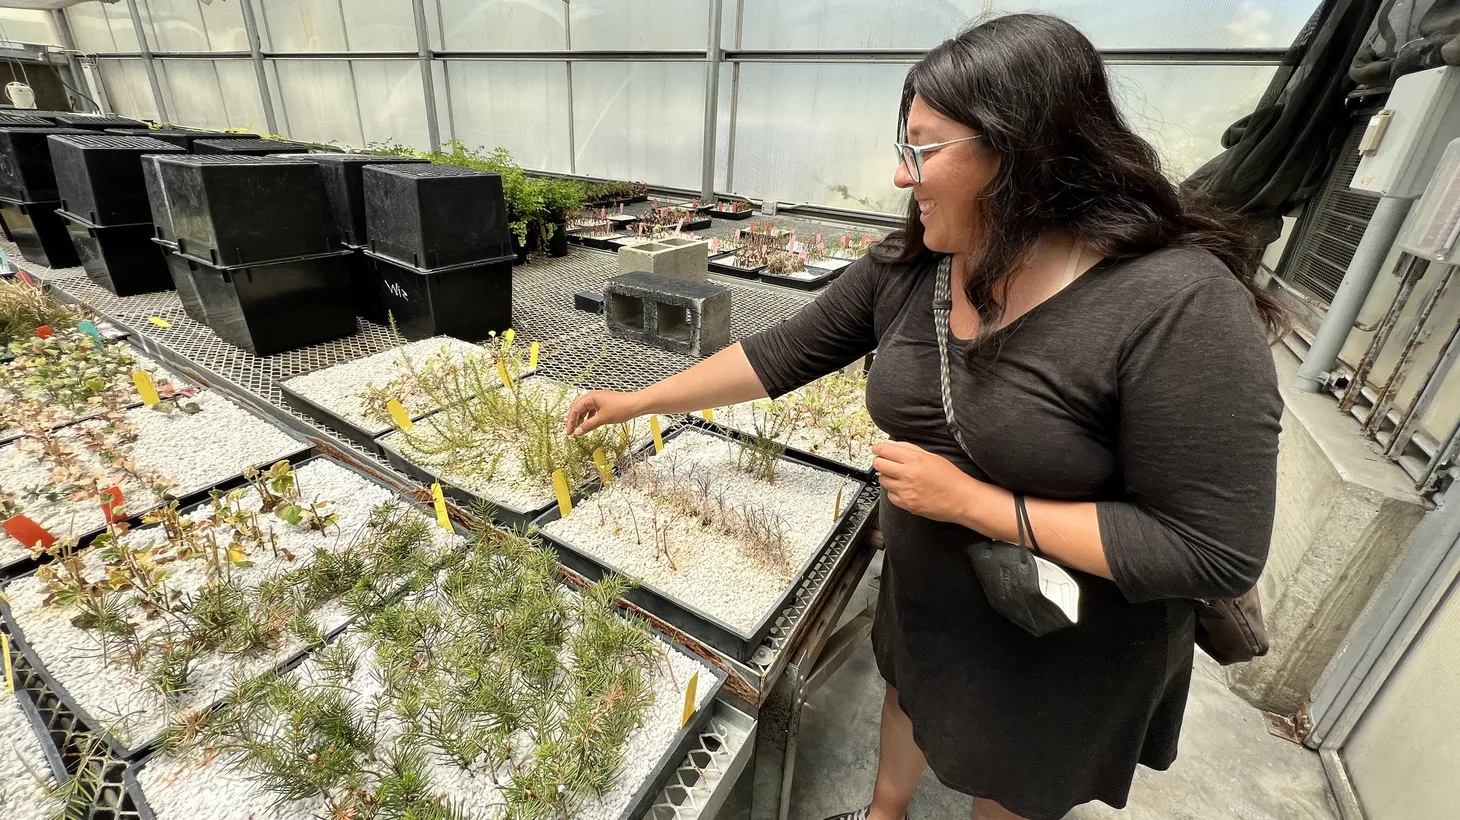 Naomi Fraga, director of conservation programs at the California Botanic Garden, shows some of the native plant samples being grown at the facility. Their cultivation is part of the lab's mission to protect the state's plant biodiversity.